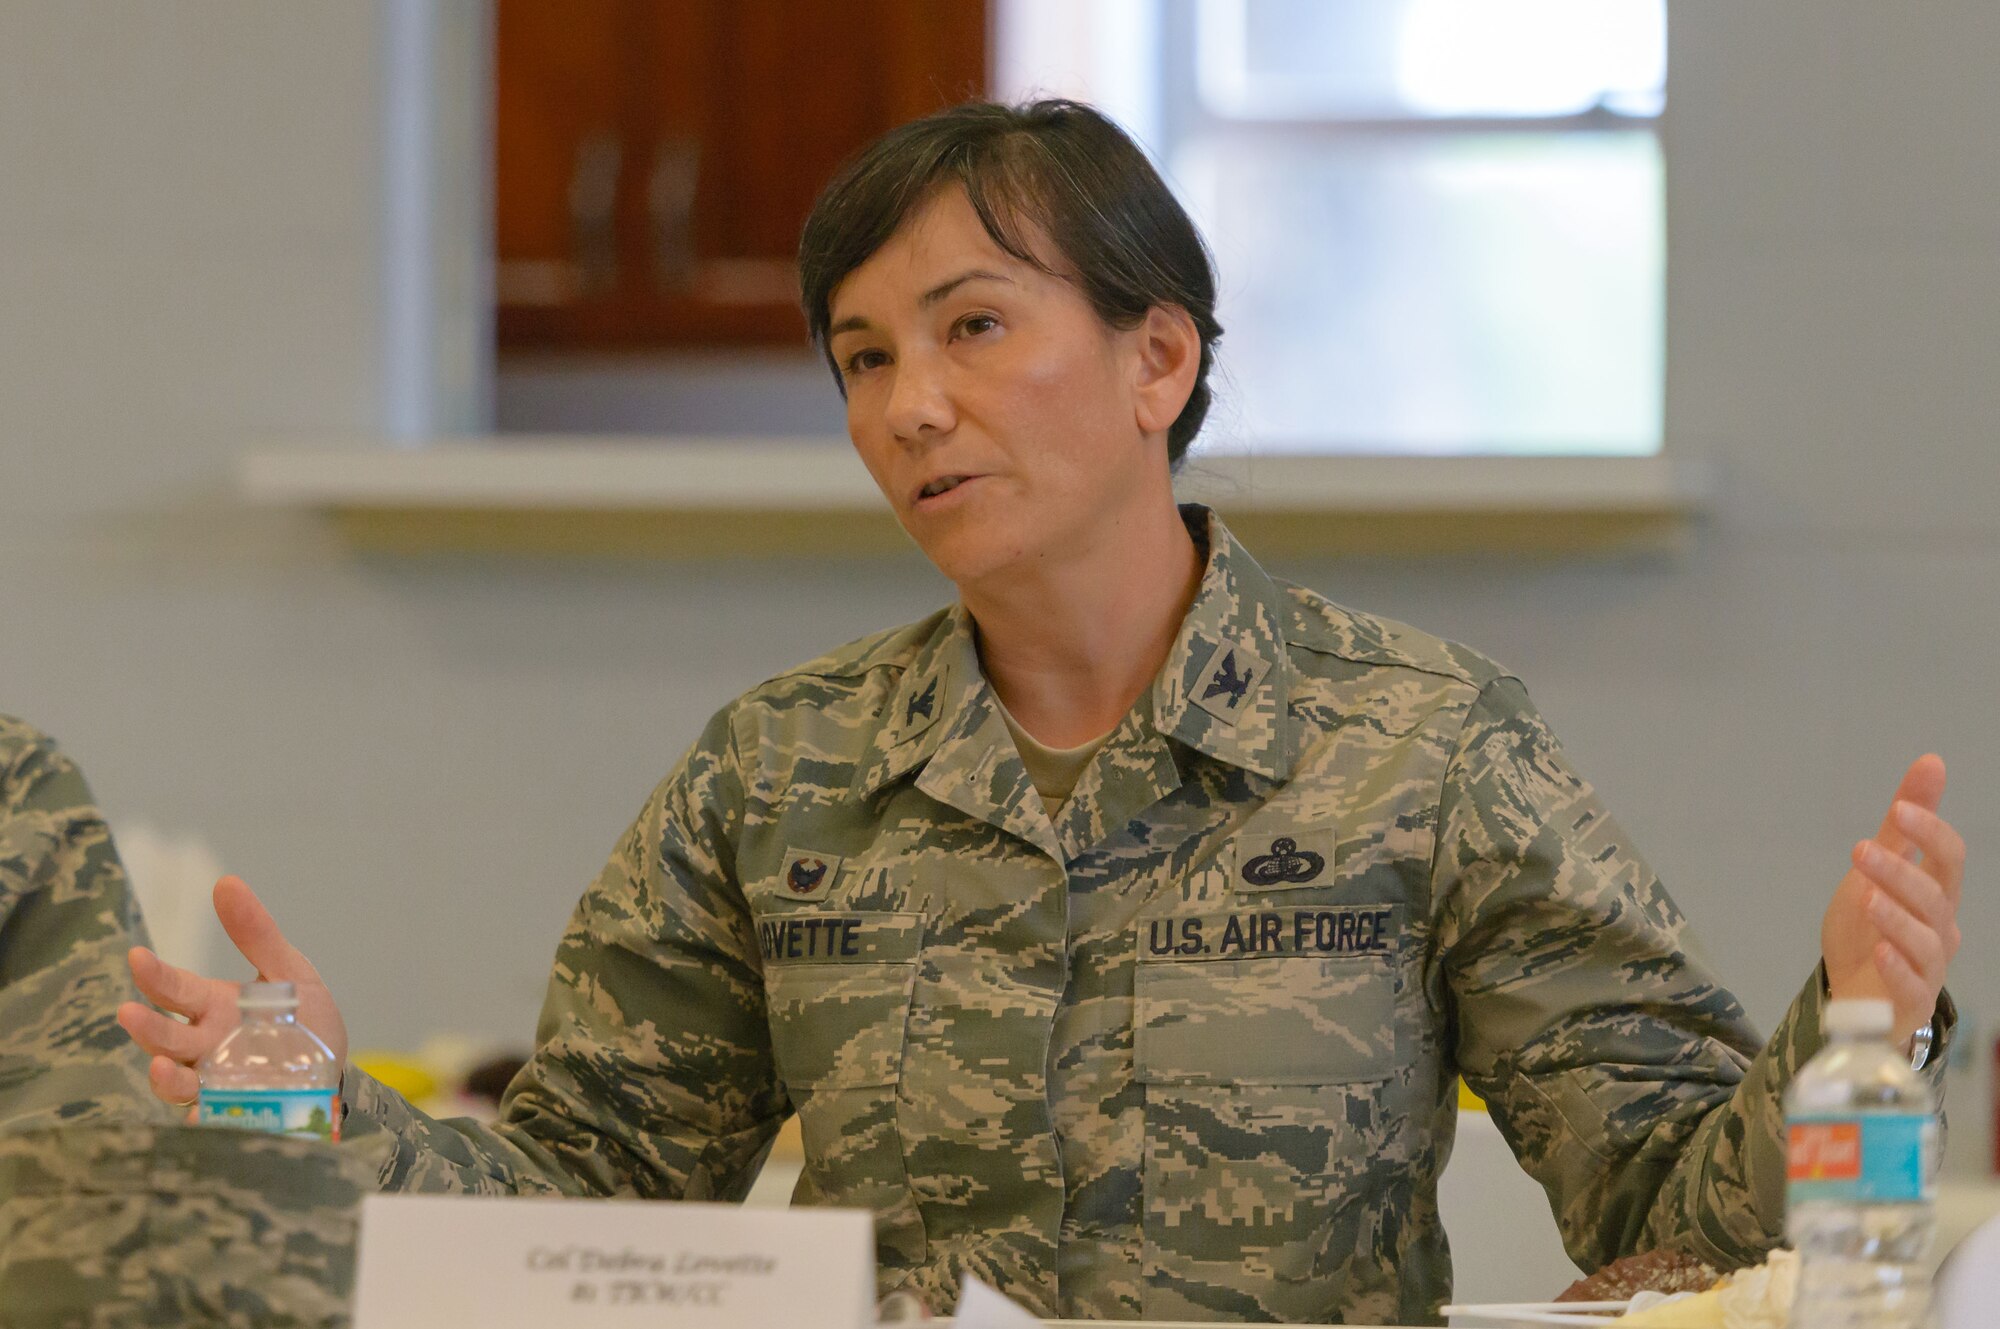 Col. Debra Lovette, 81st Training Wing commander, talks to the chaplain staff on how their vision compliments the wing’s vision during a Wing Staff Agency orientation tour at the Larcher Chapel Annex June 26, 2017, on Keesler Air Force Base, Miss. The tour familiarized Lovette with the Wing Staff Agency mission, operations and personnel. (U.S. Air Force photo by André Askew) 